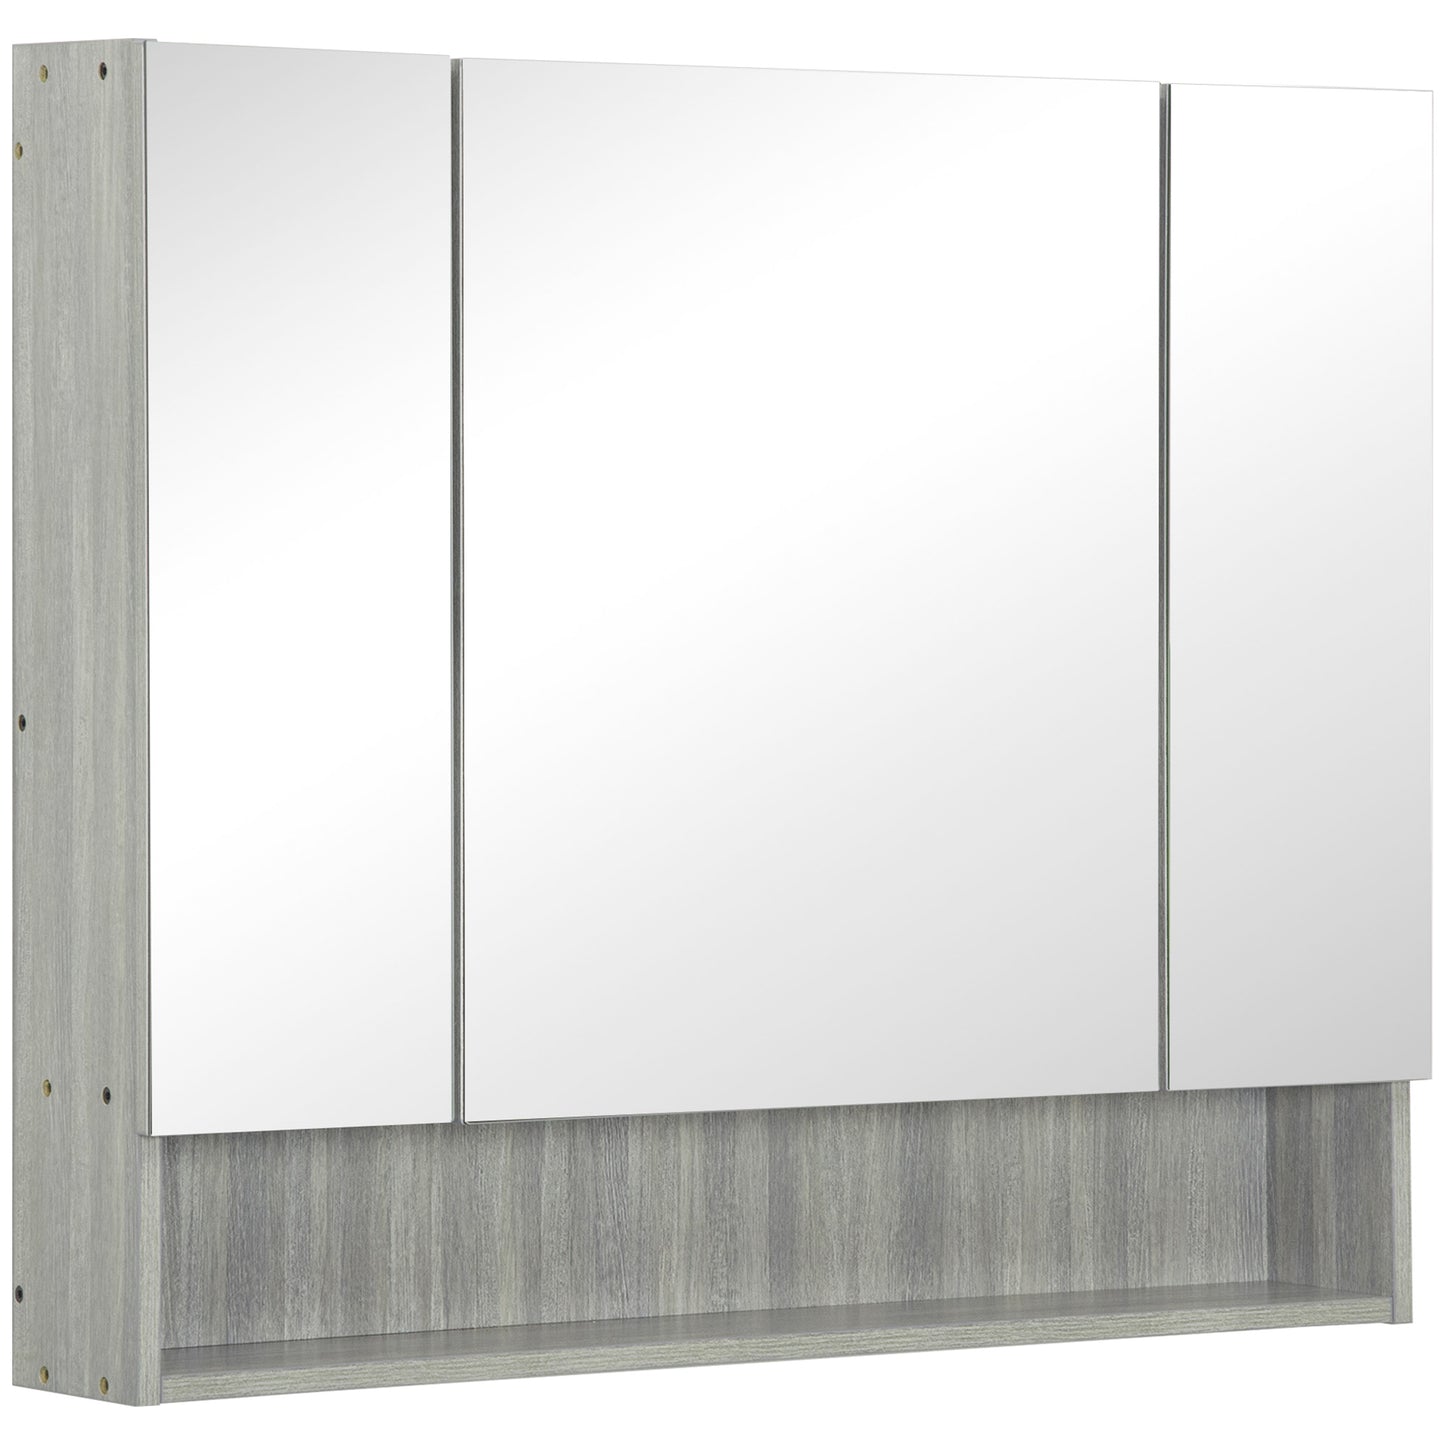 kleankin Bathroom Mirror Cabinet, Wall Mounted Storage Cabinet with Adjustable Shelves, 3 Doors and Cupboards, Grey